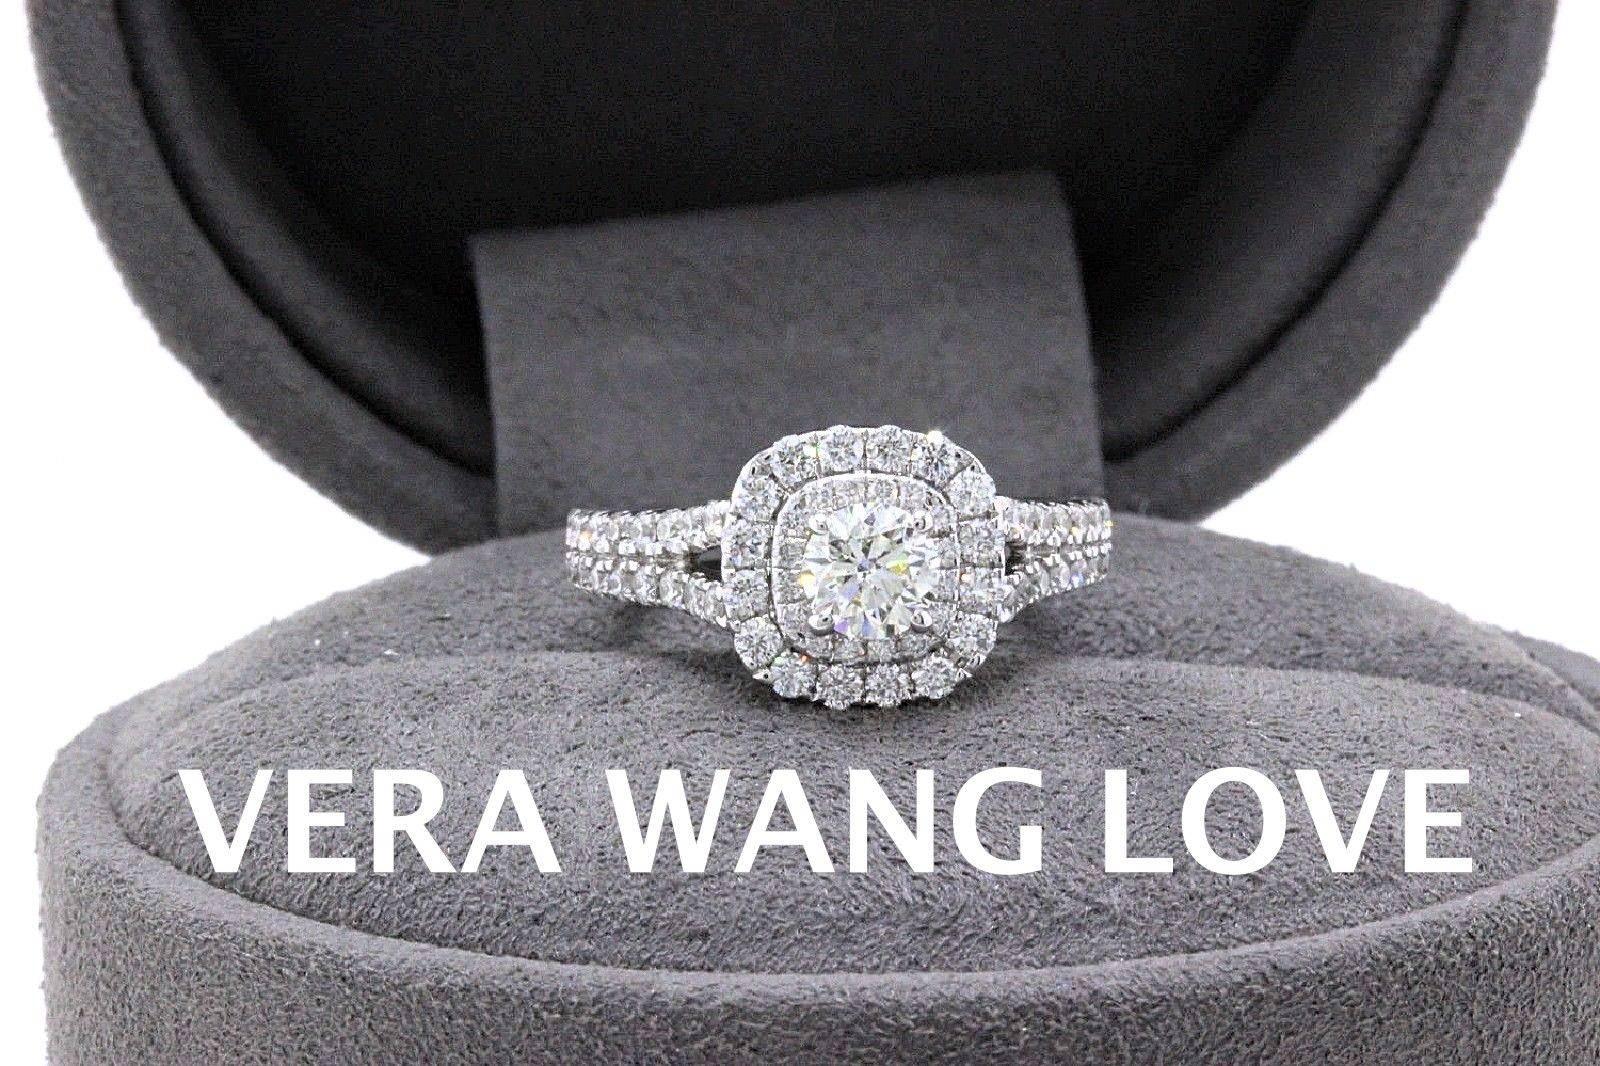 VERA WANG LOVE COLLECTION 
Style:  1 1/2 TCW Diamond Frame Split Shank Engagement Ring
Sku Number:  18628156
Metal:  14KT White Gold
Size:  5 - Sizable
Total Carat Weight:  1.50 TCW
Diamond Shape:  Round Diamond 0.50 CTS
Diamond Color & Clarity:  I